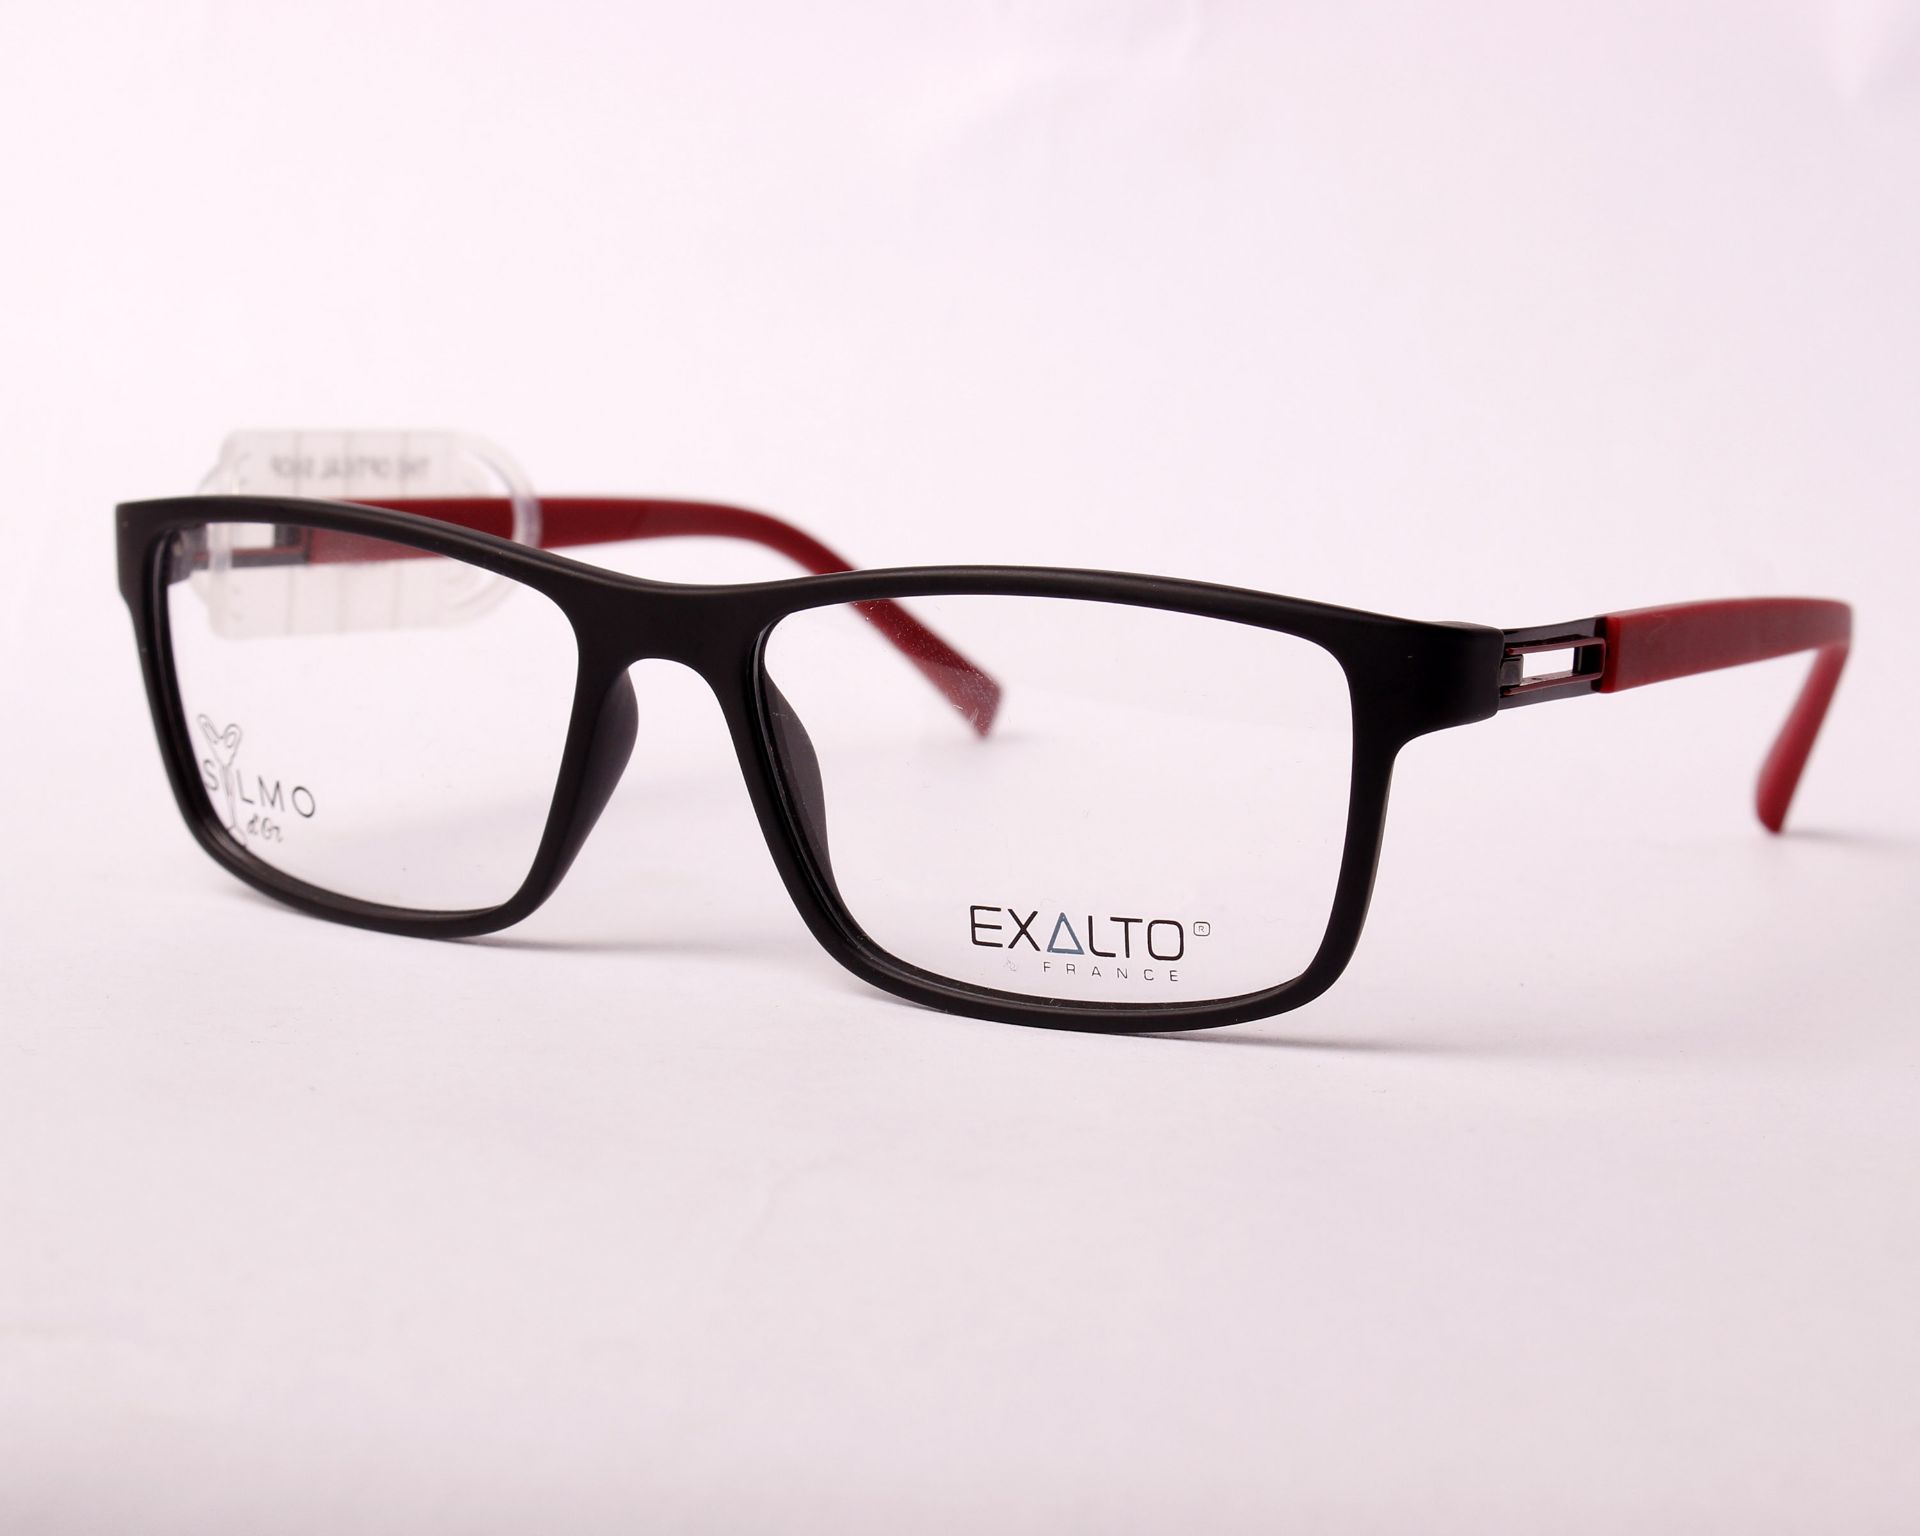 A pair of as new Exalto glasses frames with clear glass (RRP £270).